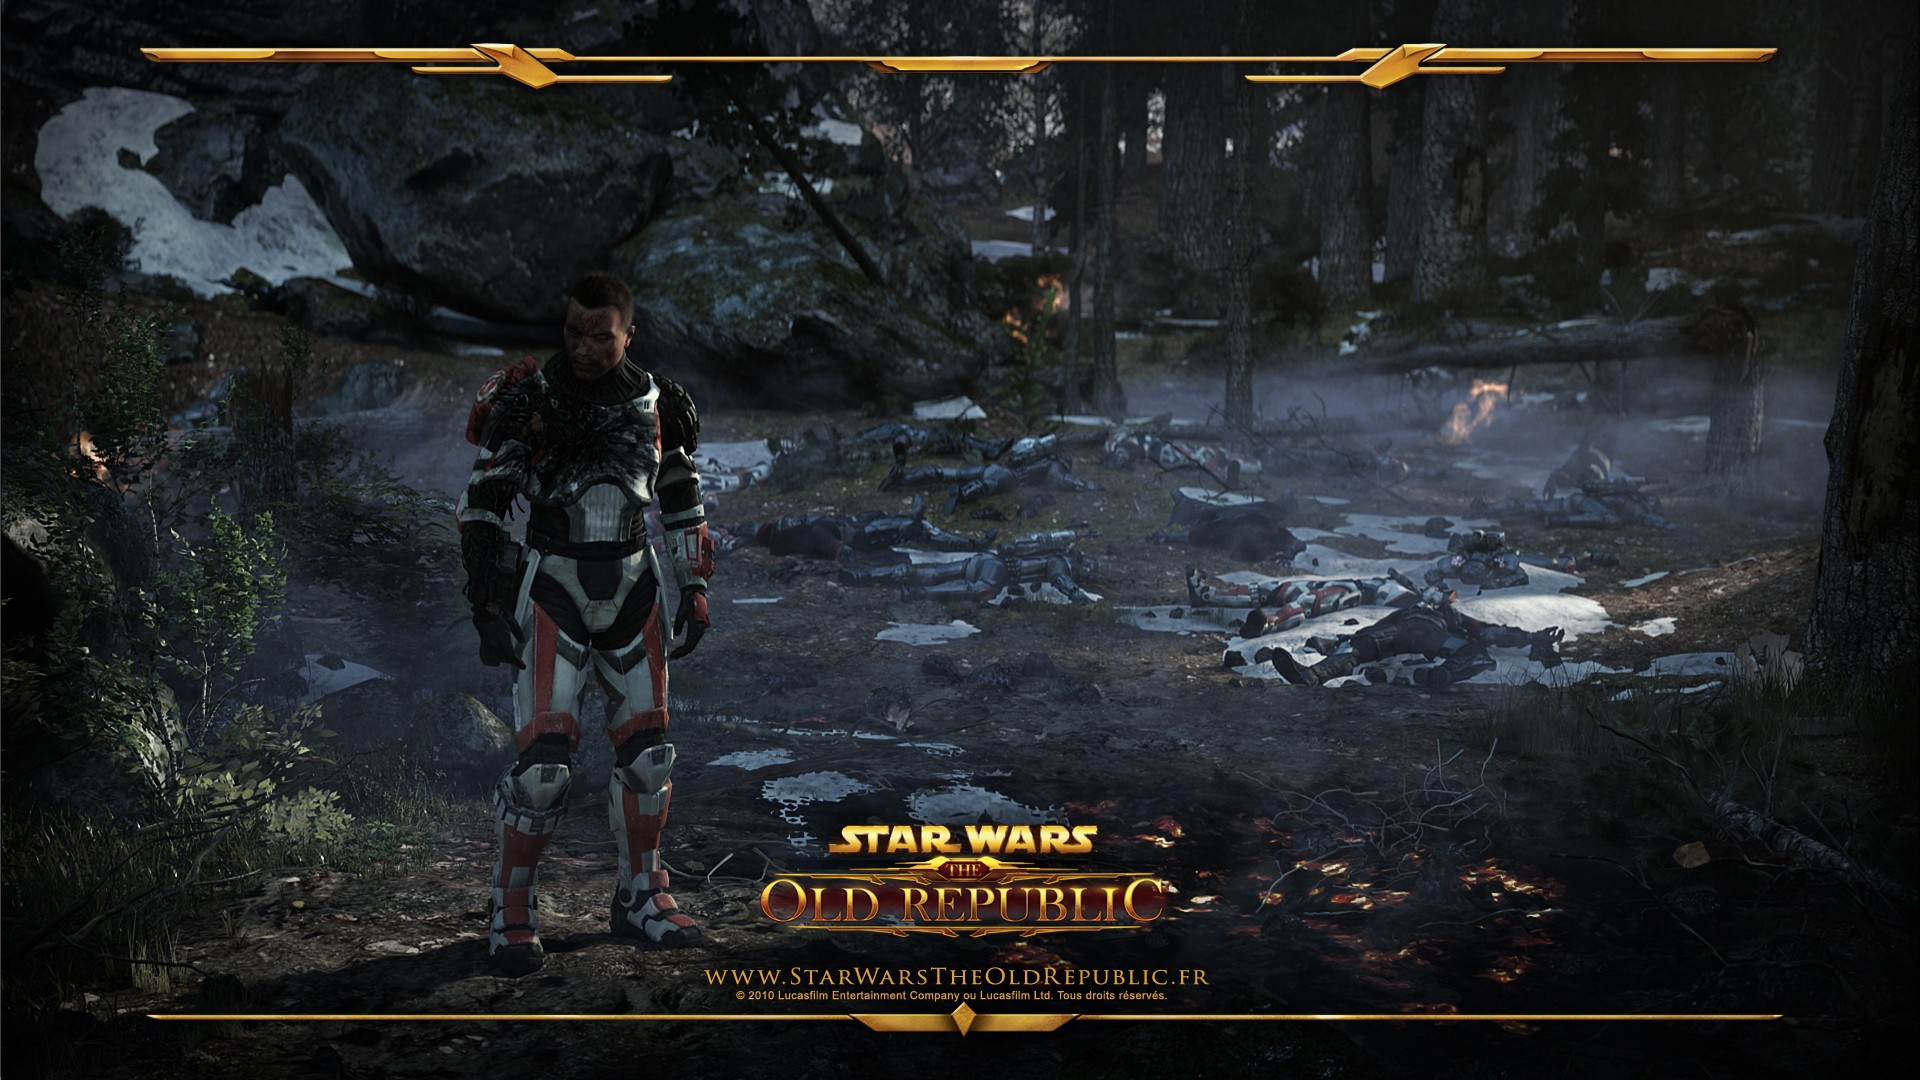 General 1920x1080 Star Wars Star Wars: The Old Republic 2010 (Year) PC gaming science fiction